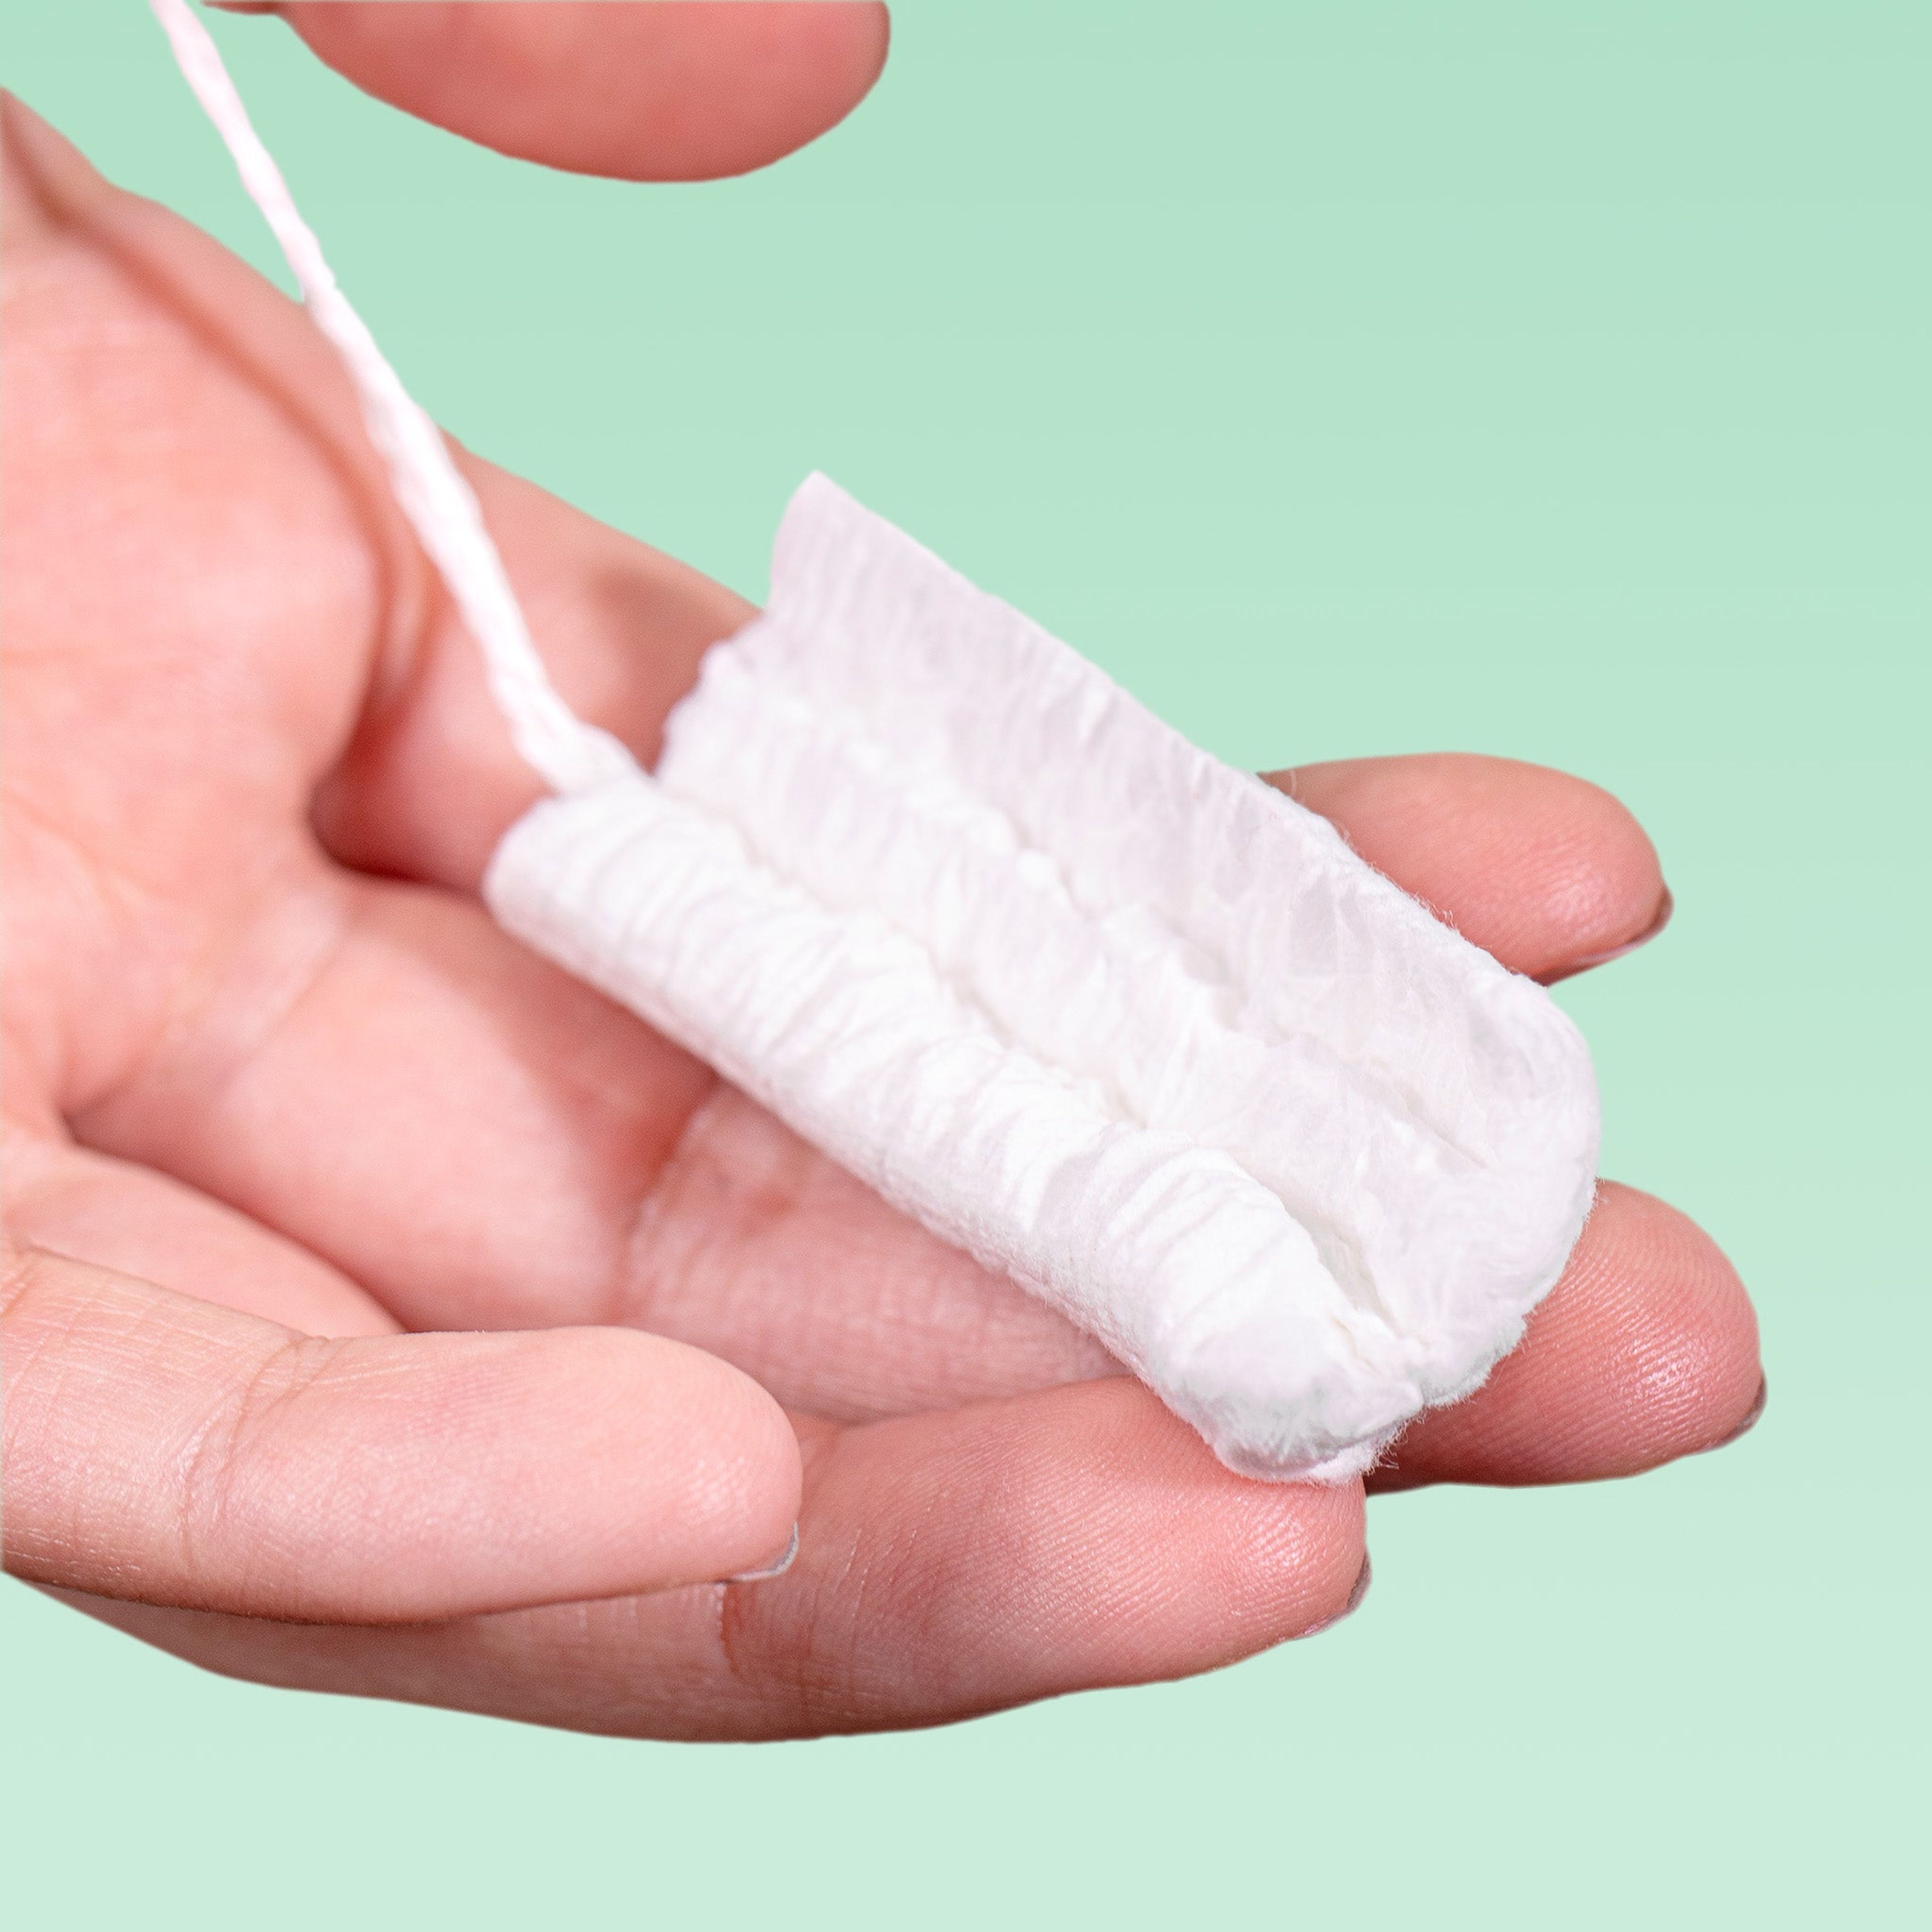 Cardboard Applicator Tampons Made With Organic Cotton